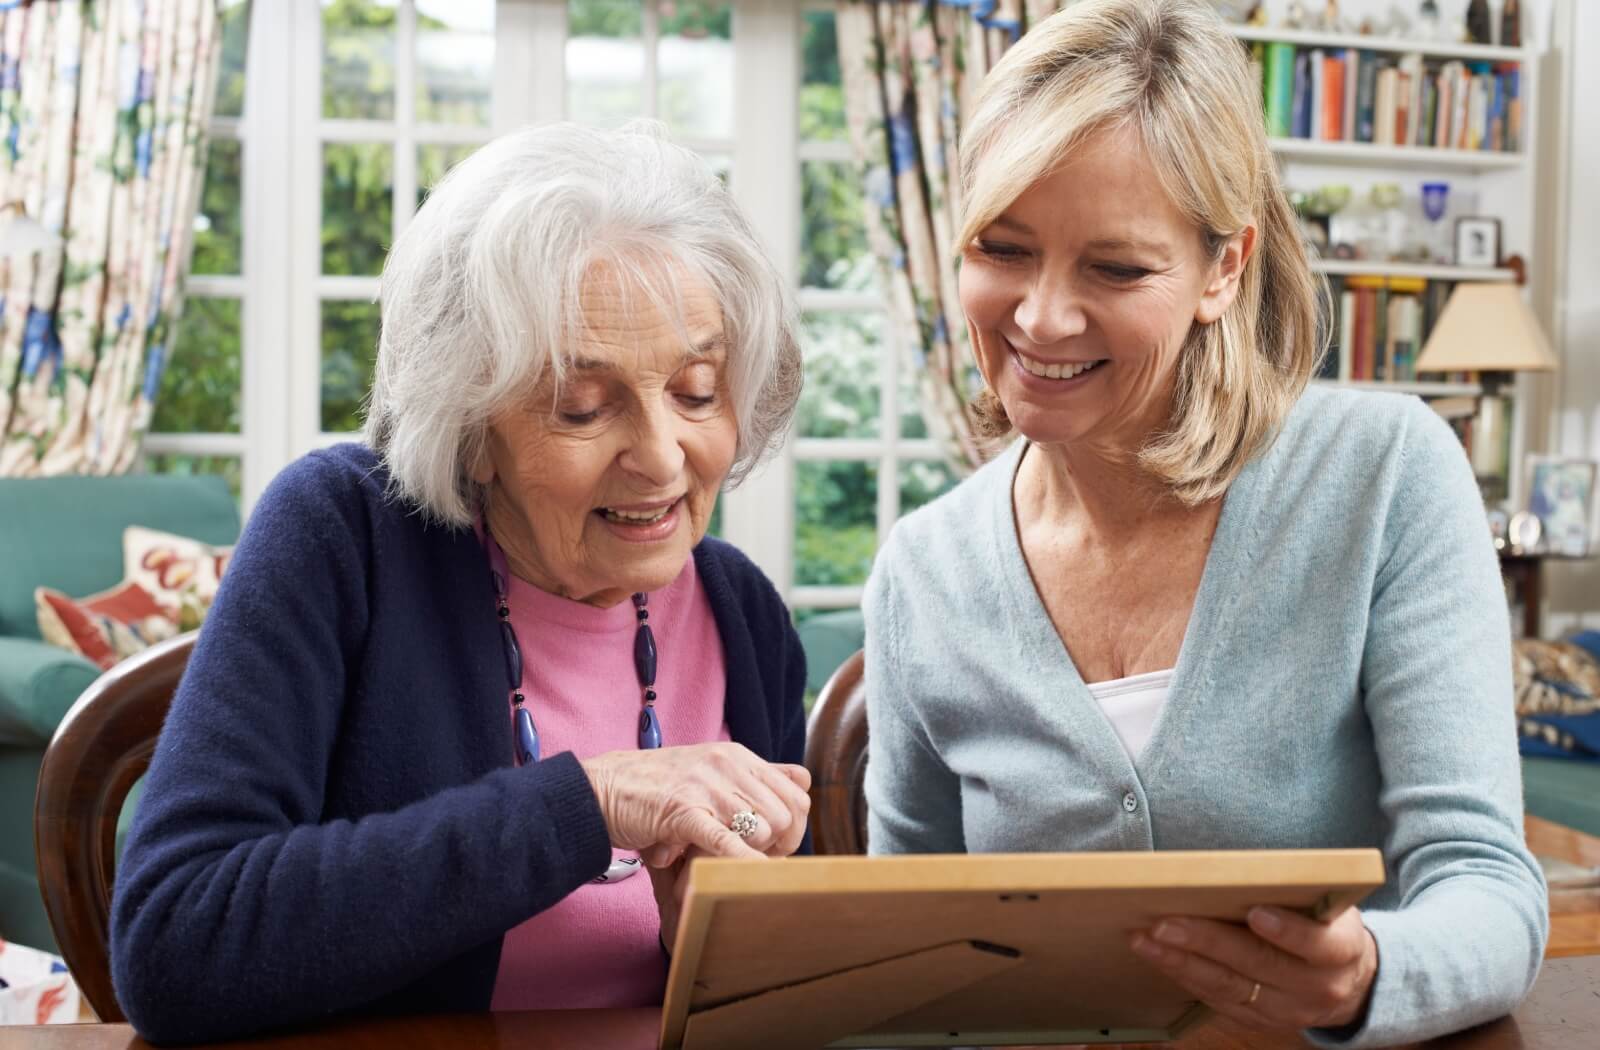 An older adult woman and her middle-aged daughter looking at a photo fondly.